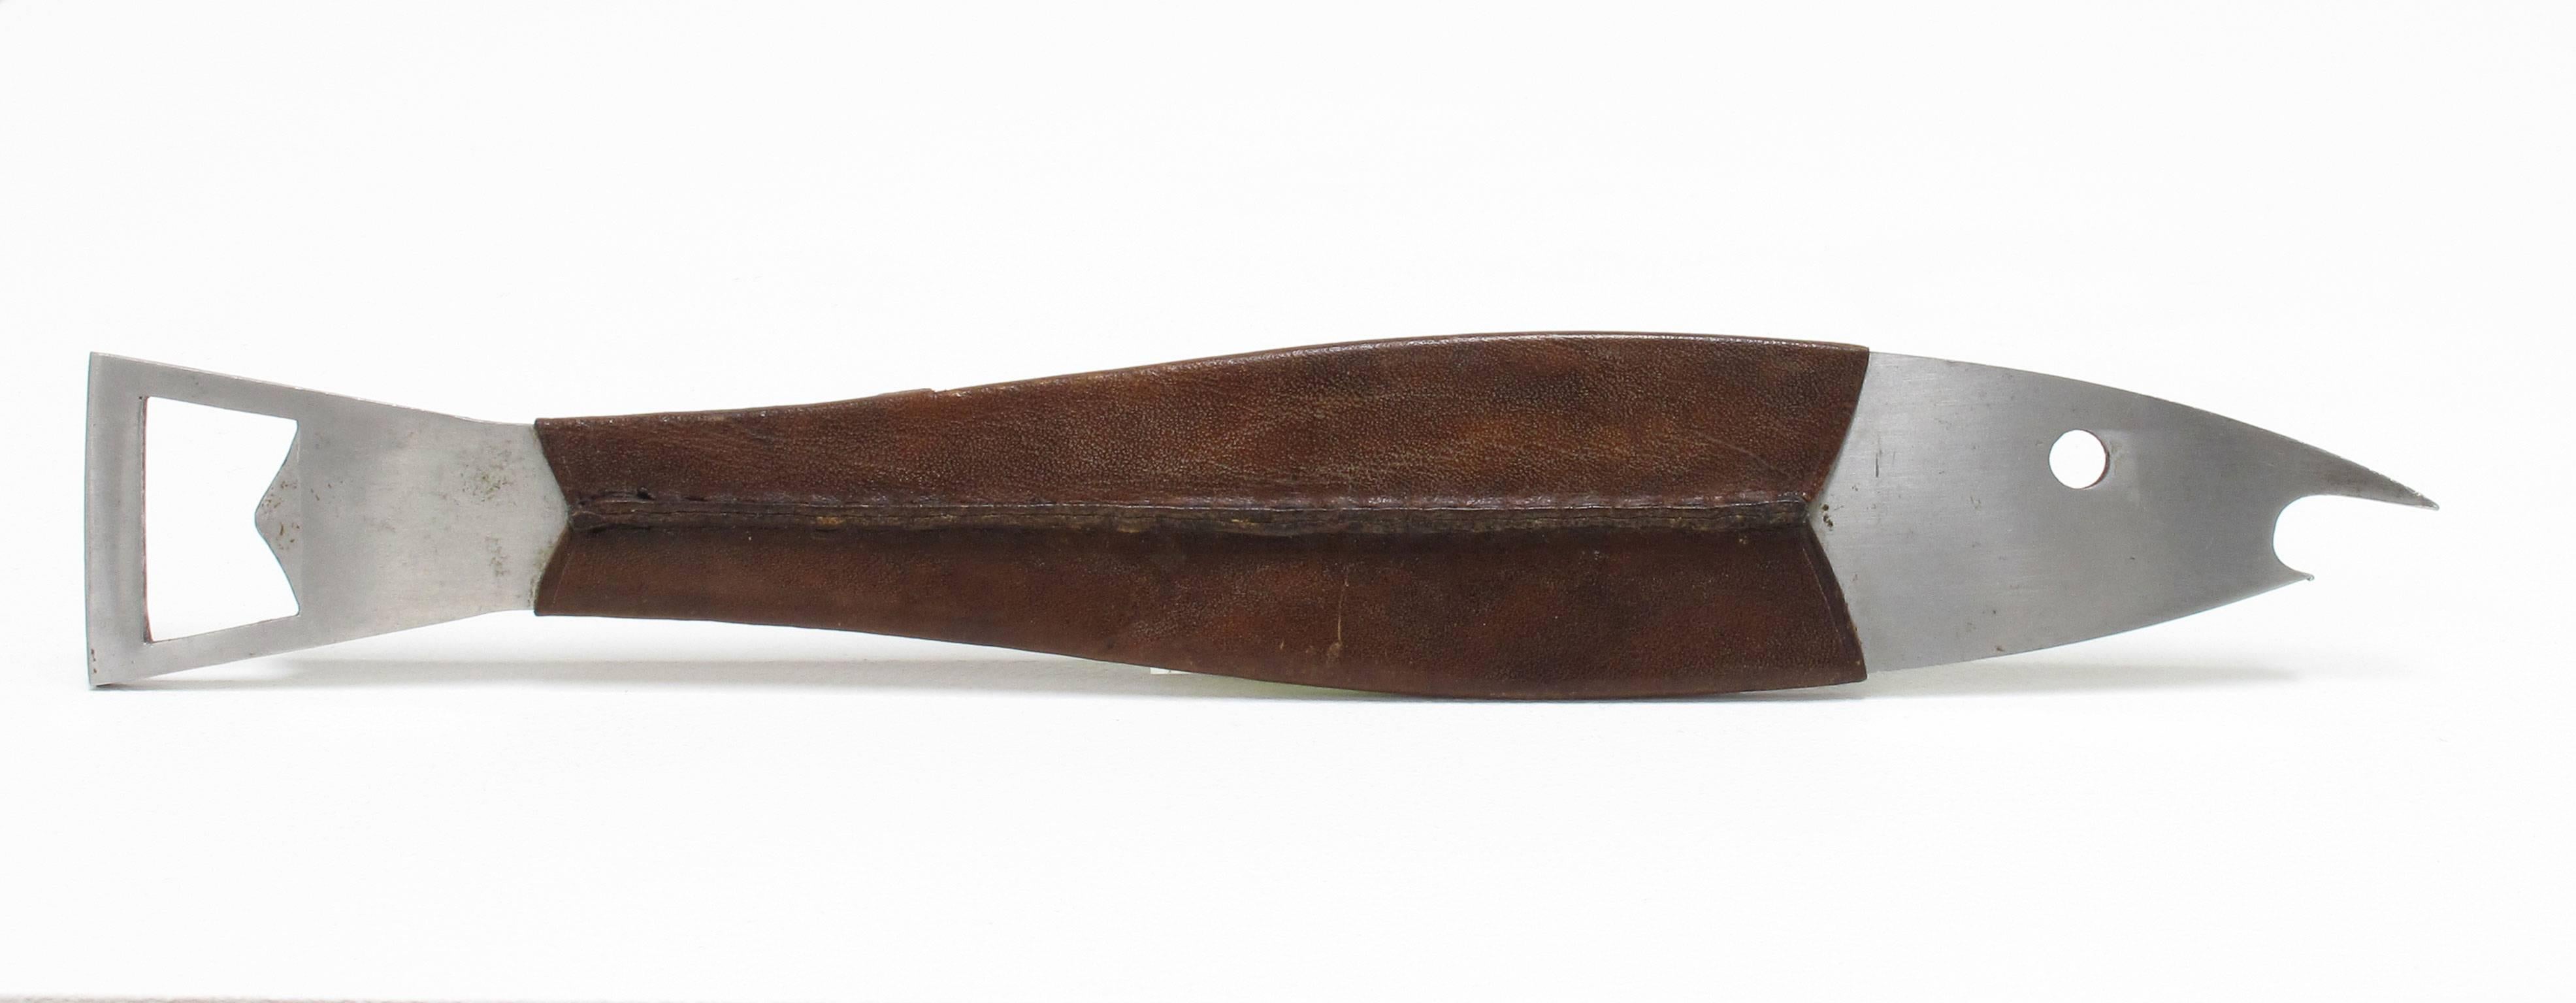 Carl Auböck
'Neptune', 1950s
Bottle opener, fish shaped bar tool
Stainless steel, hand-stitched leather
Modernist, Austria, Werkstätte Auböck

Measurements in inches:1.38 high x 9.5 wide x 0.13 deep